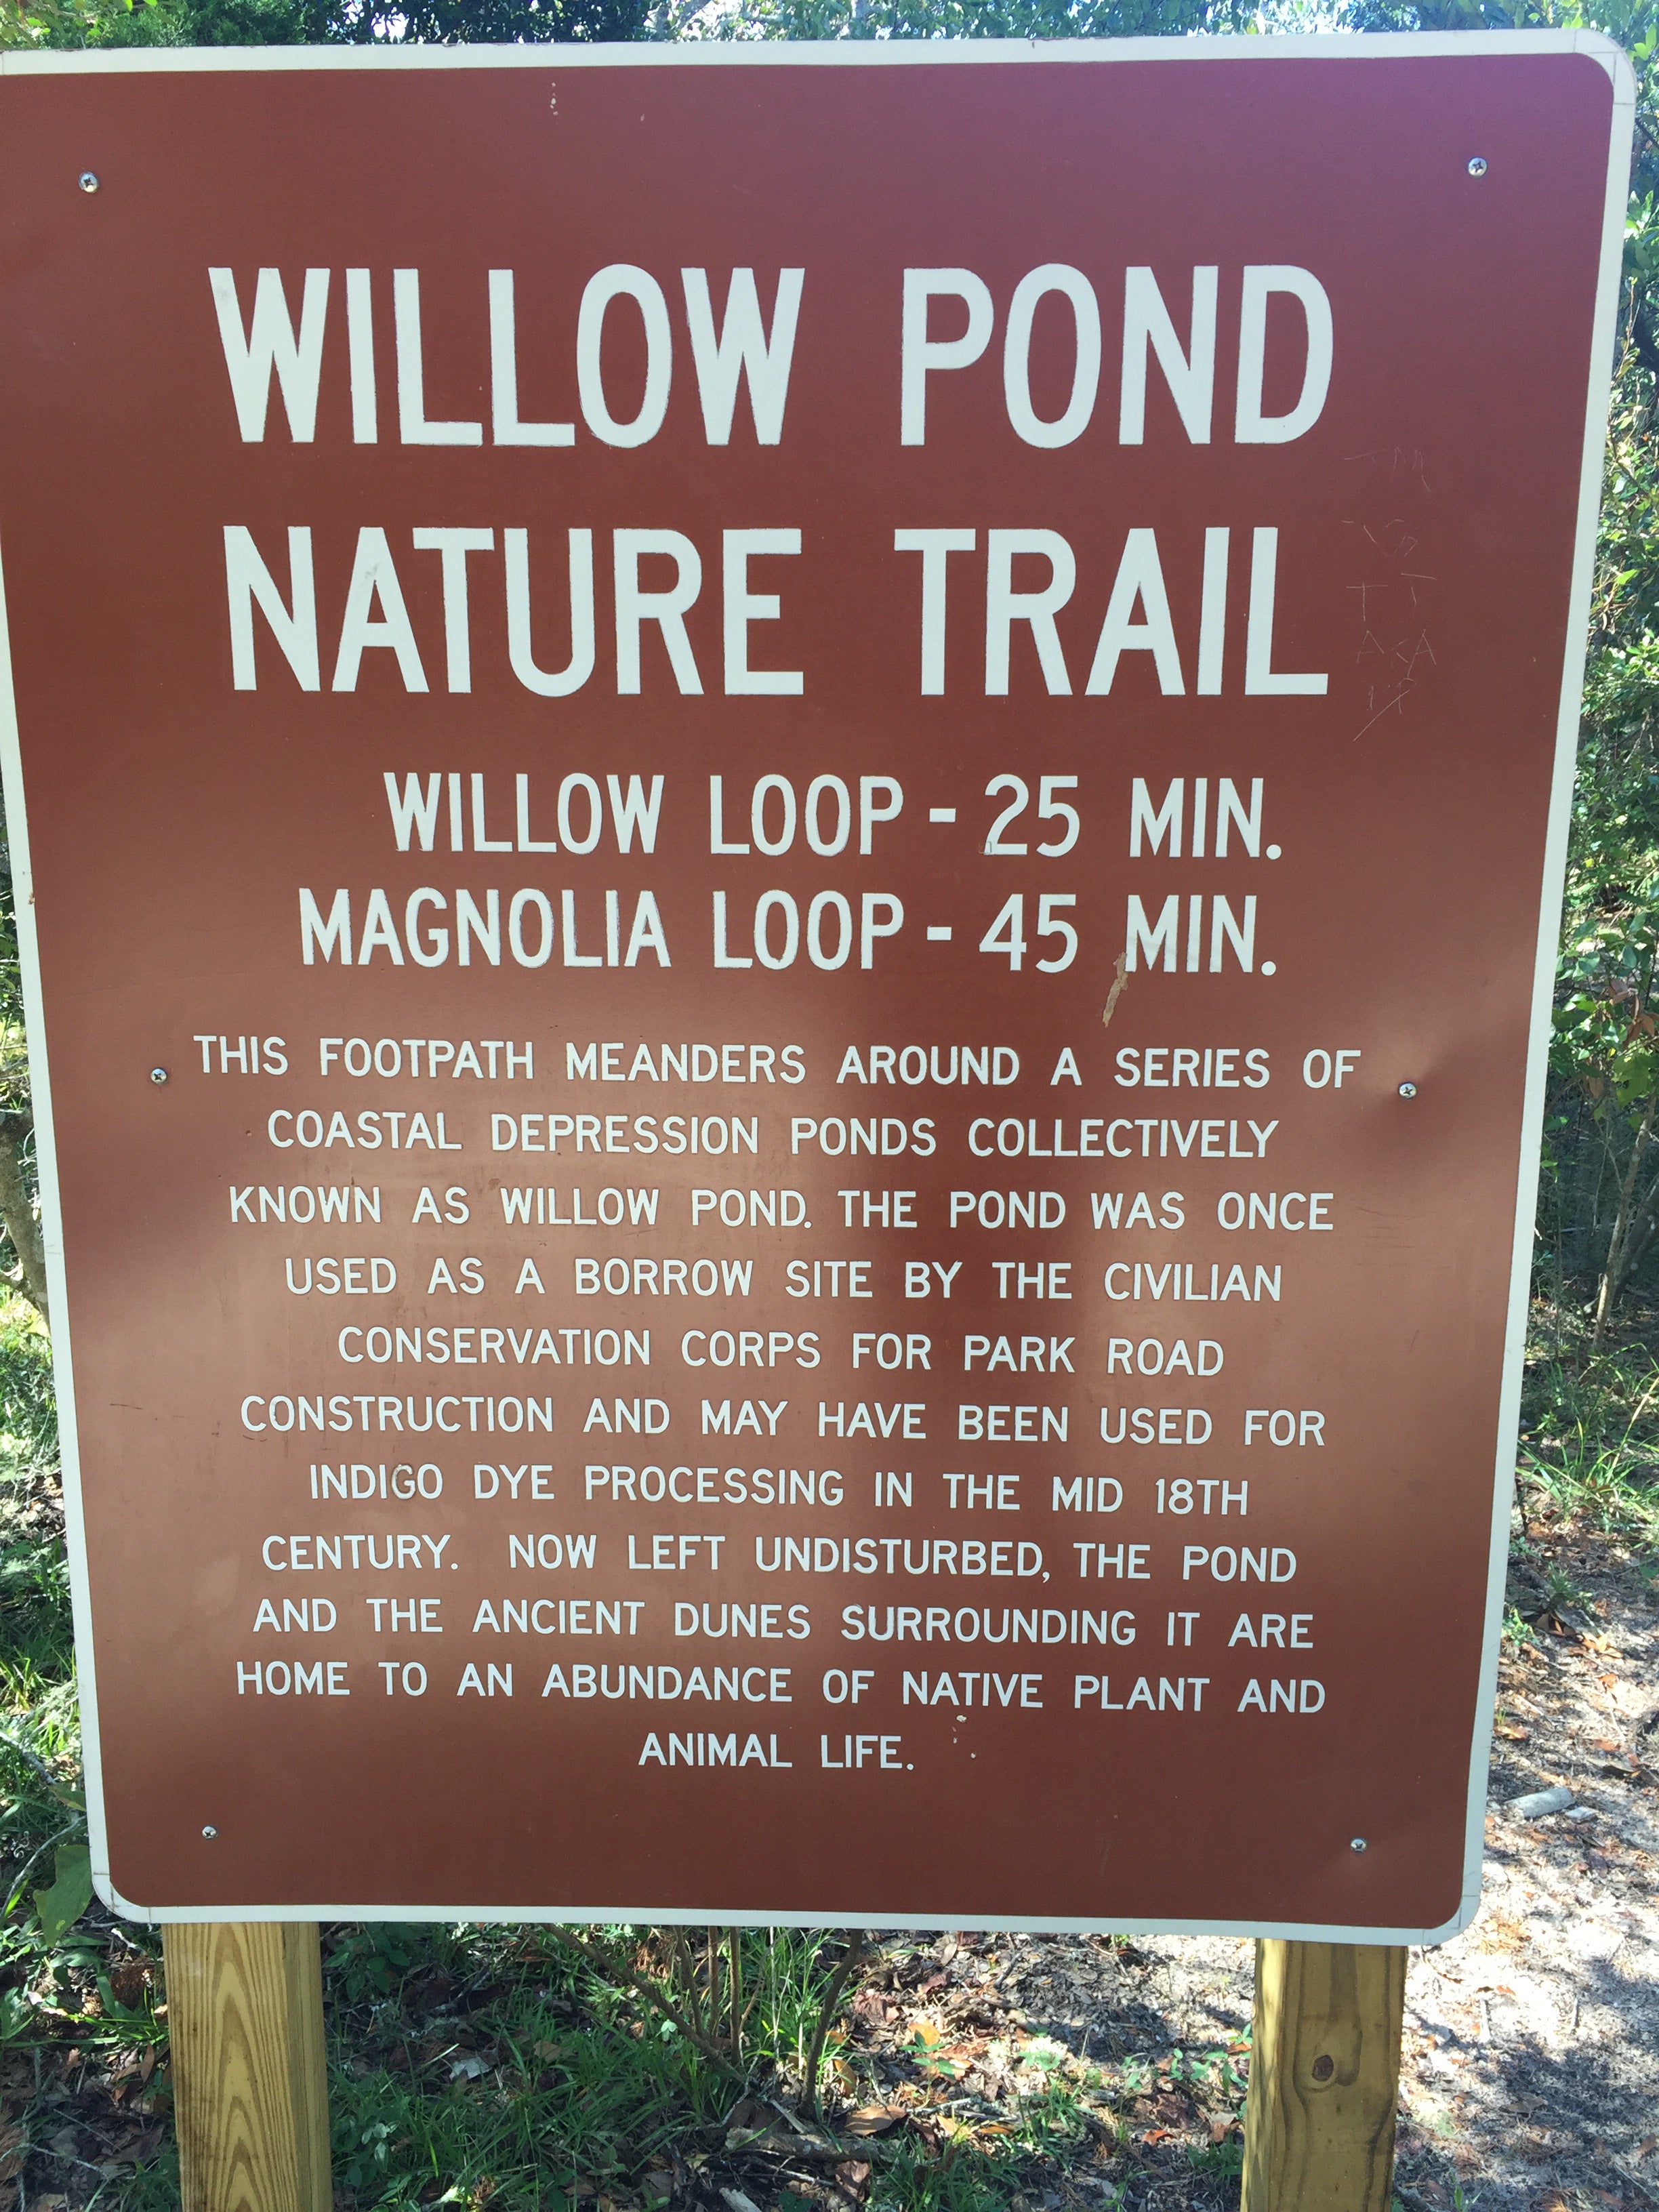 Willow Pond Nature Trail, Fort Clinch State Park